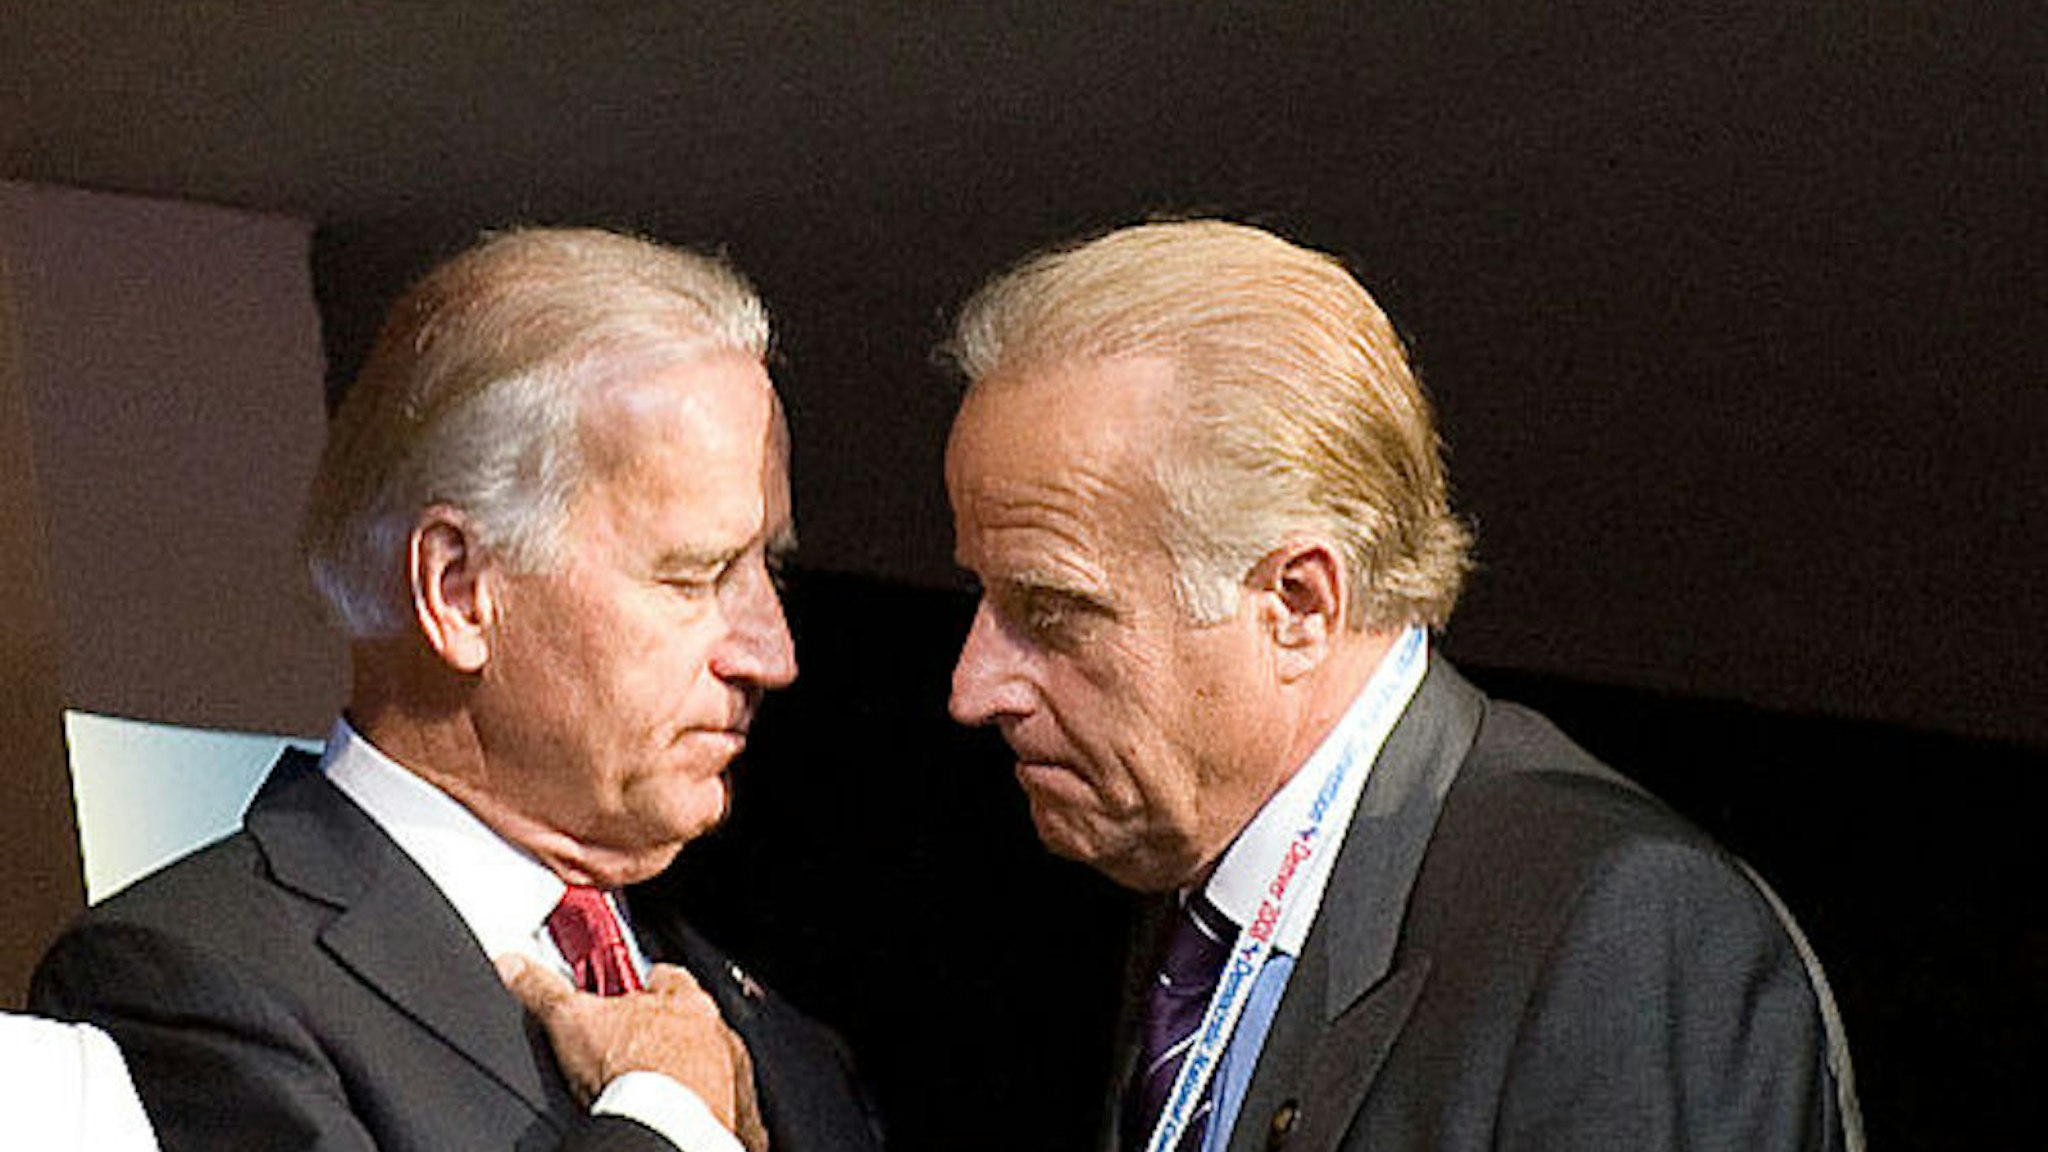 Democratic Vice Presidential candidate Joe Biden (L) and his brother James Biden during the Democratic National Convention in Denver. (Photo by Rick Friedman/Corbis via Getty Images)